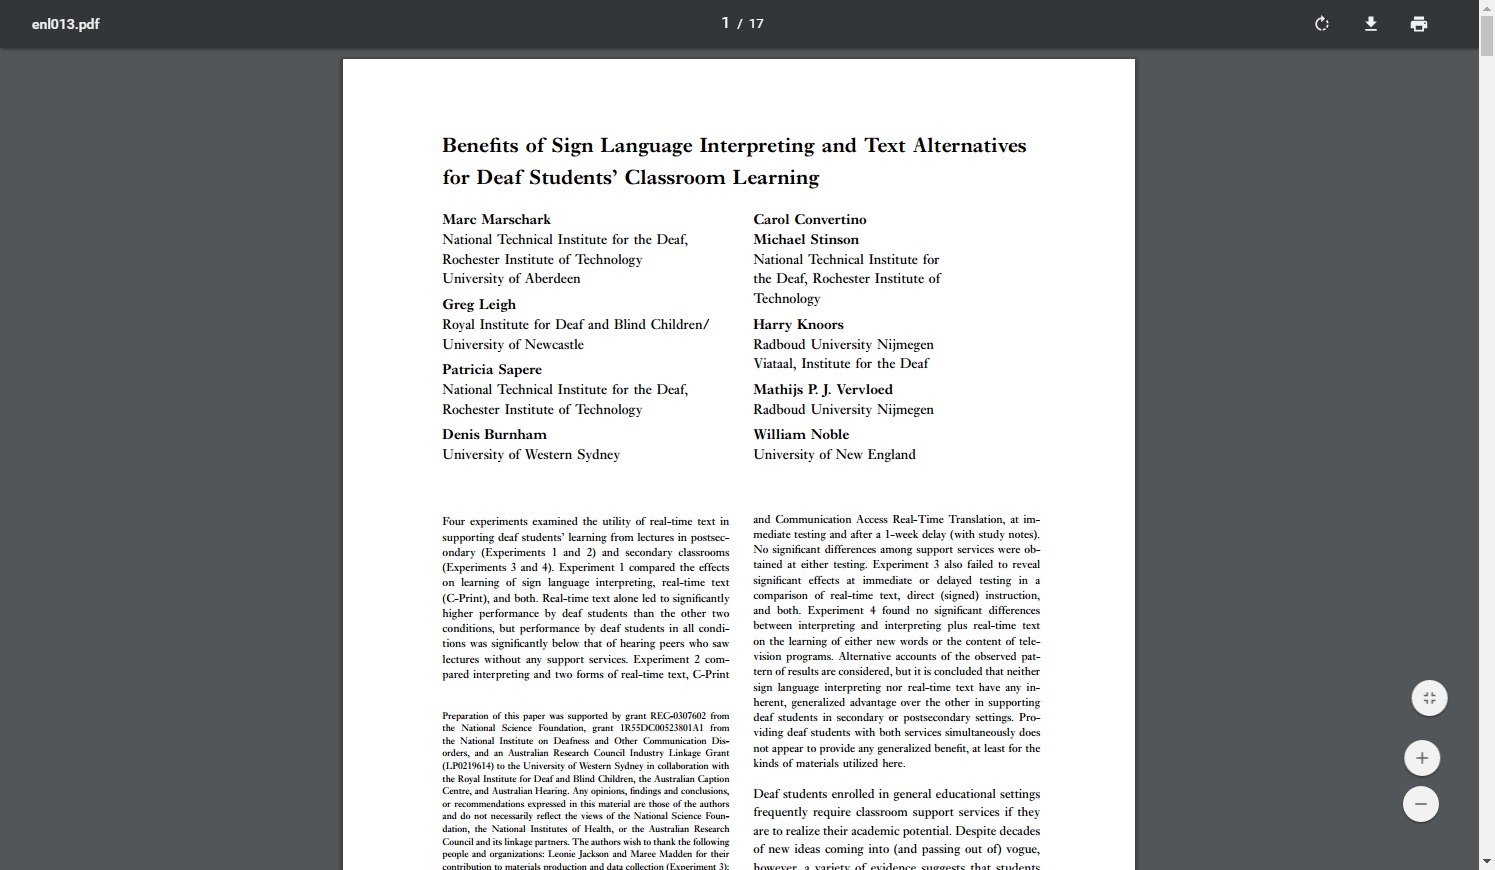 Benefits of Sign Language Interpreting and Text Alternatives for Deaf Students' Classroom Learning